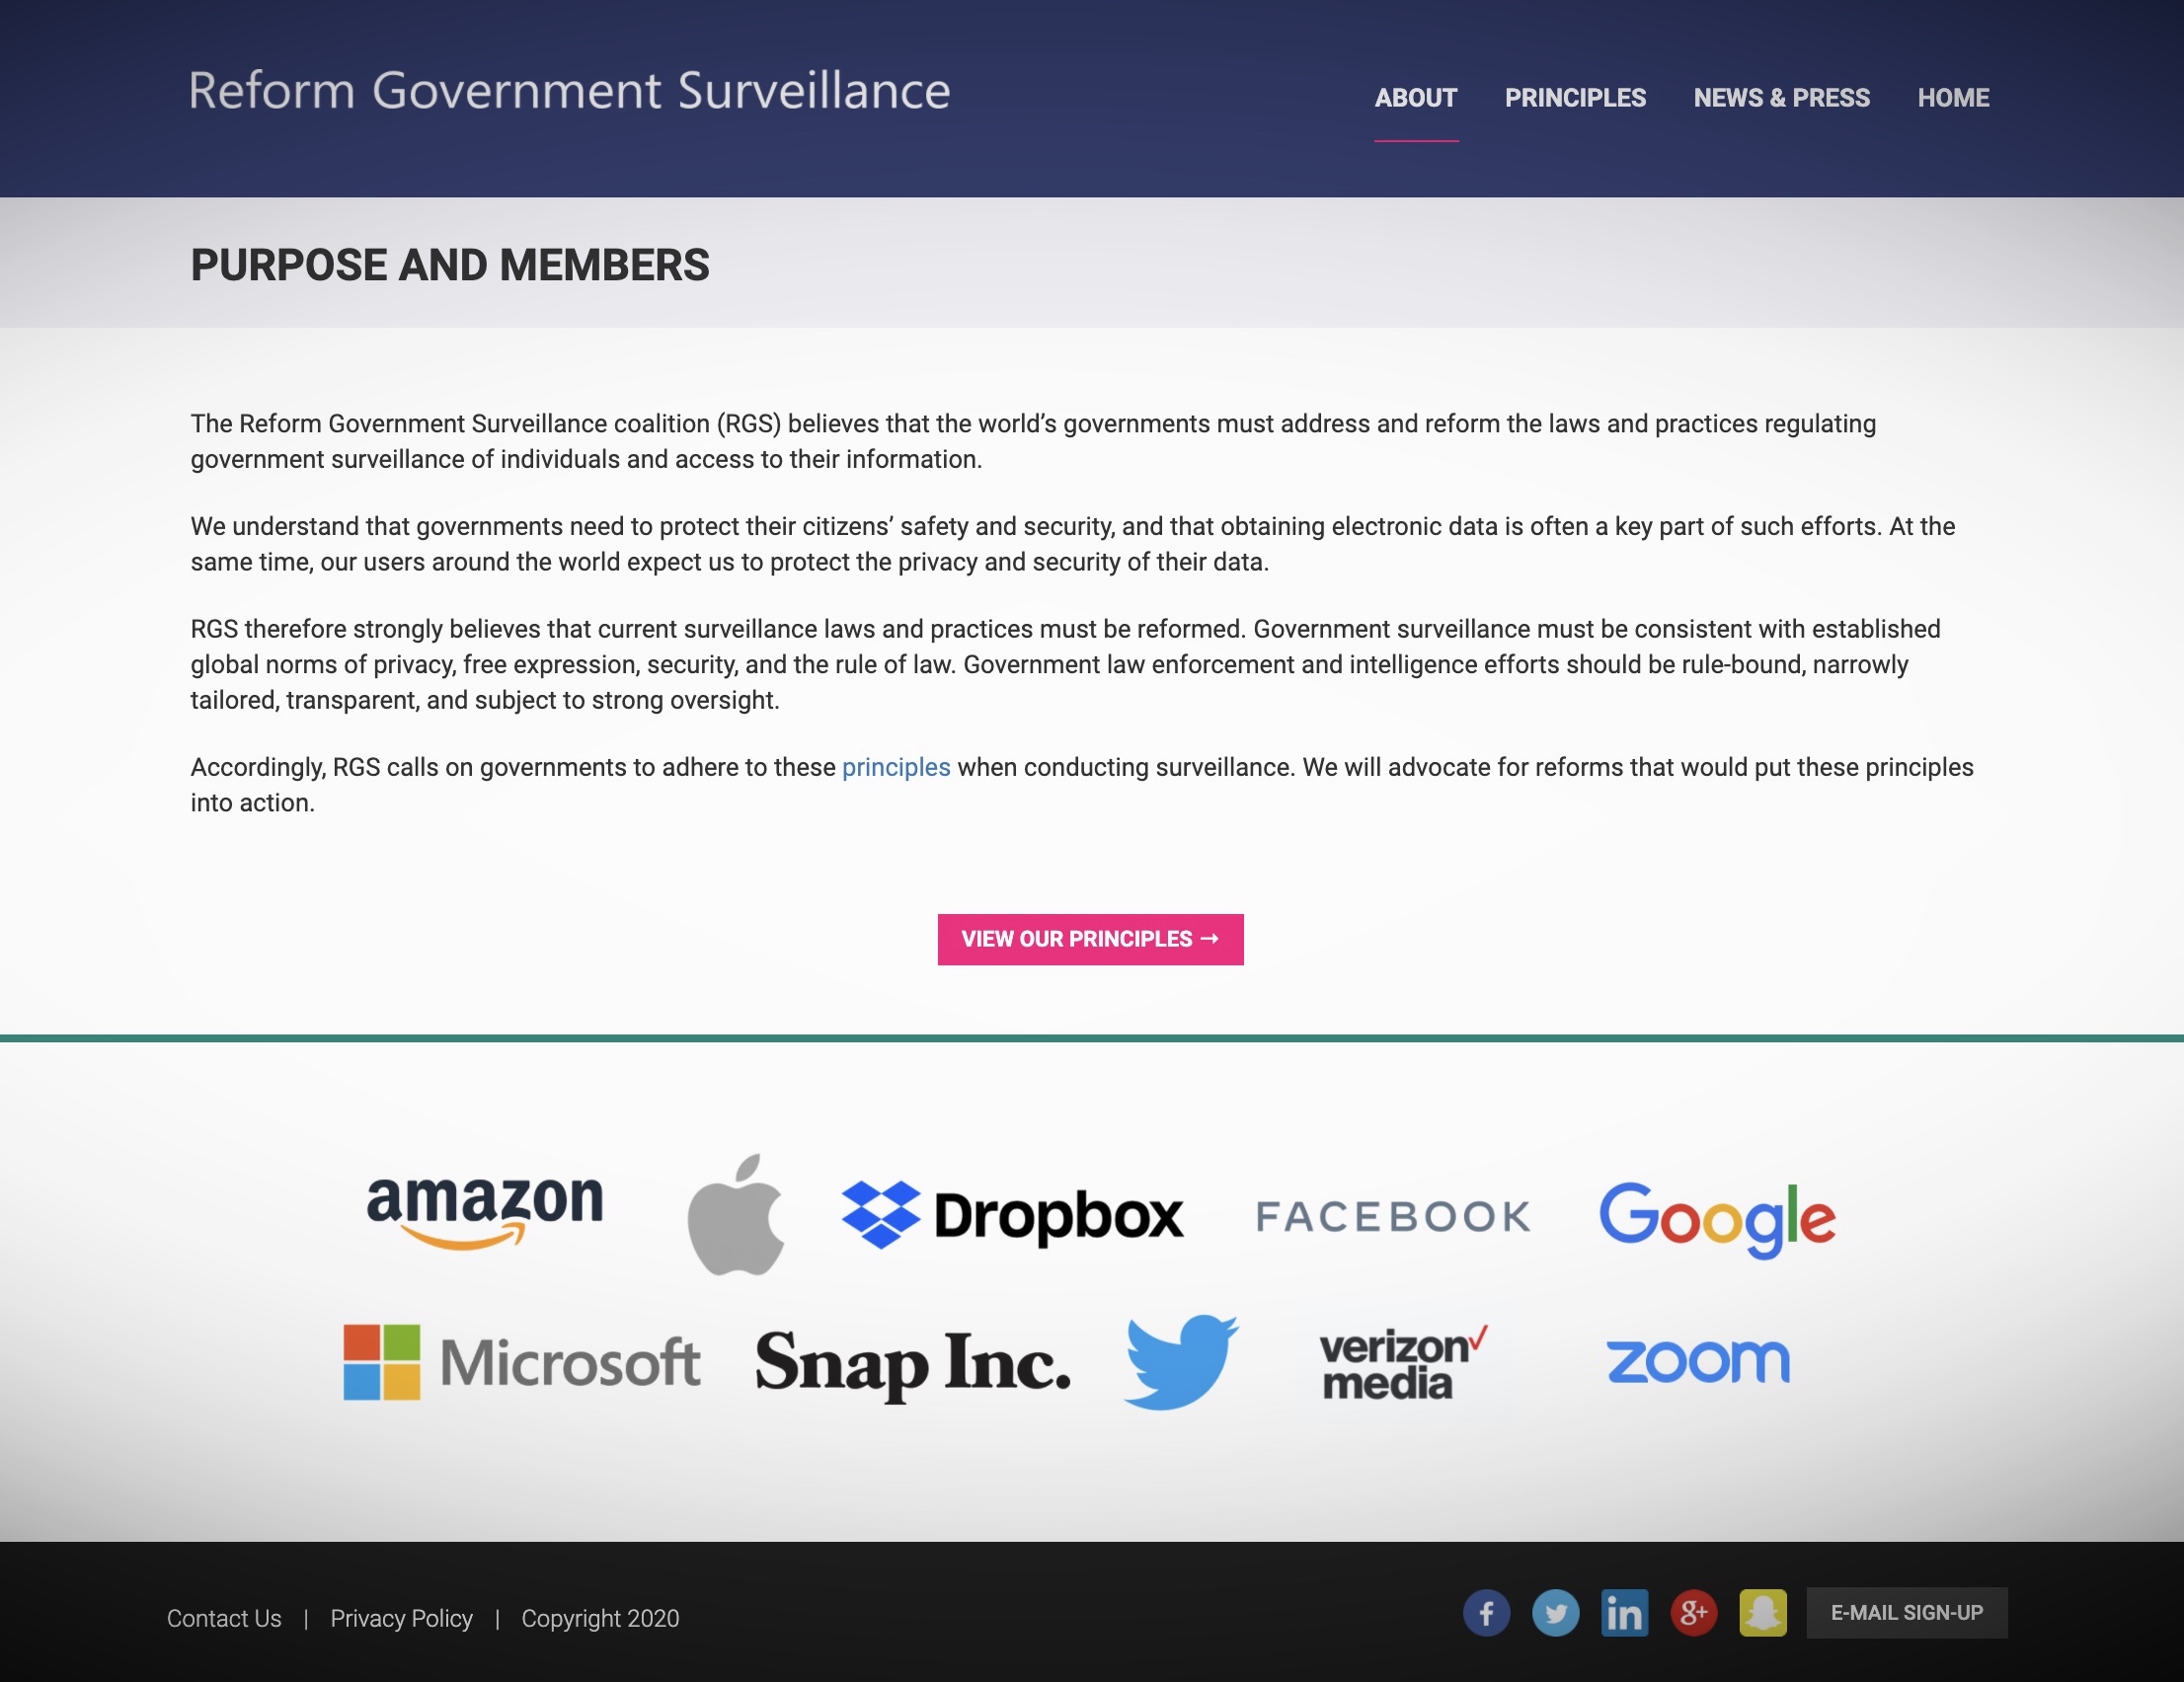 Evernote quietly disappeared from an anti-surveillance lobbying group’s website